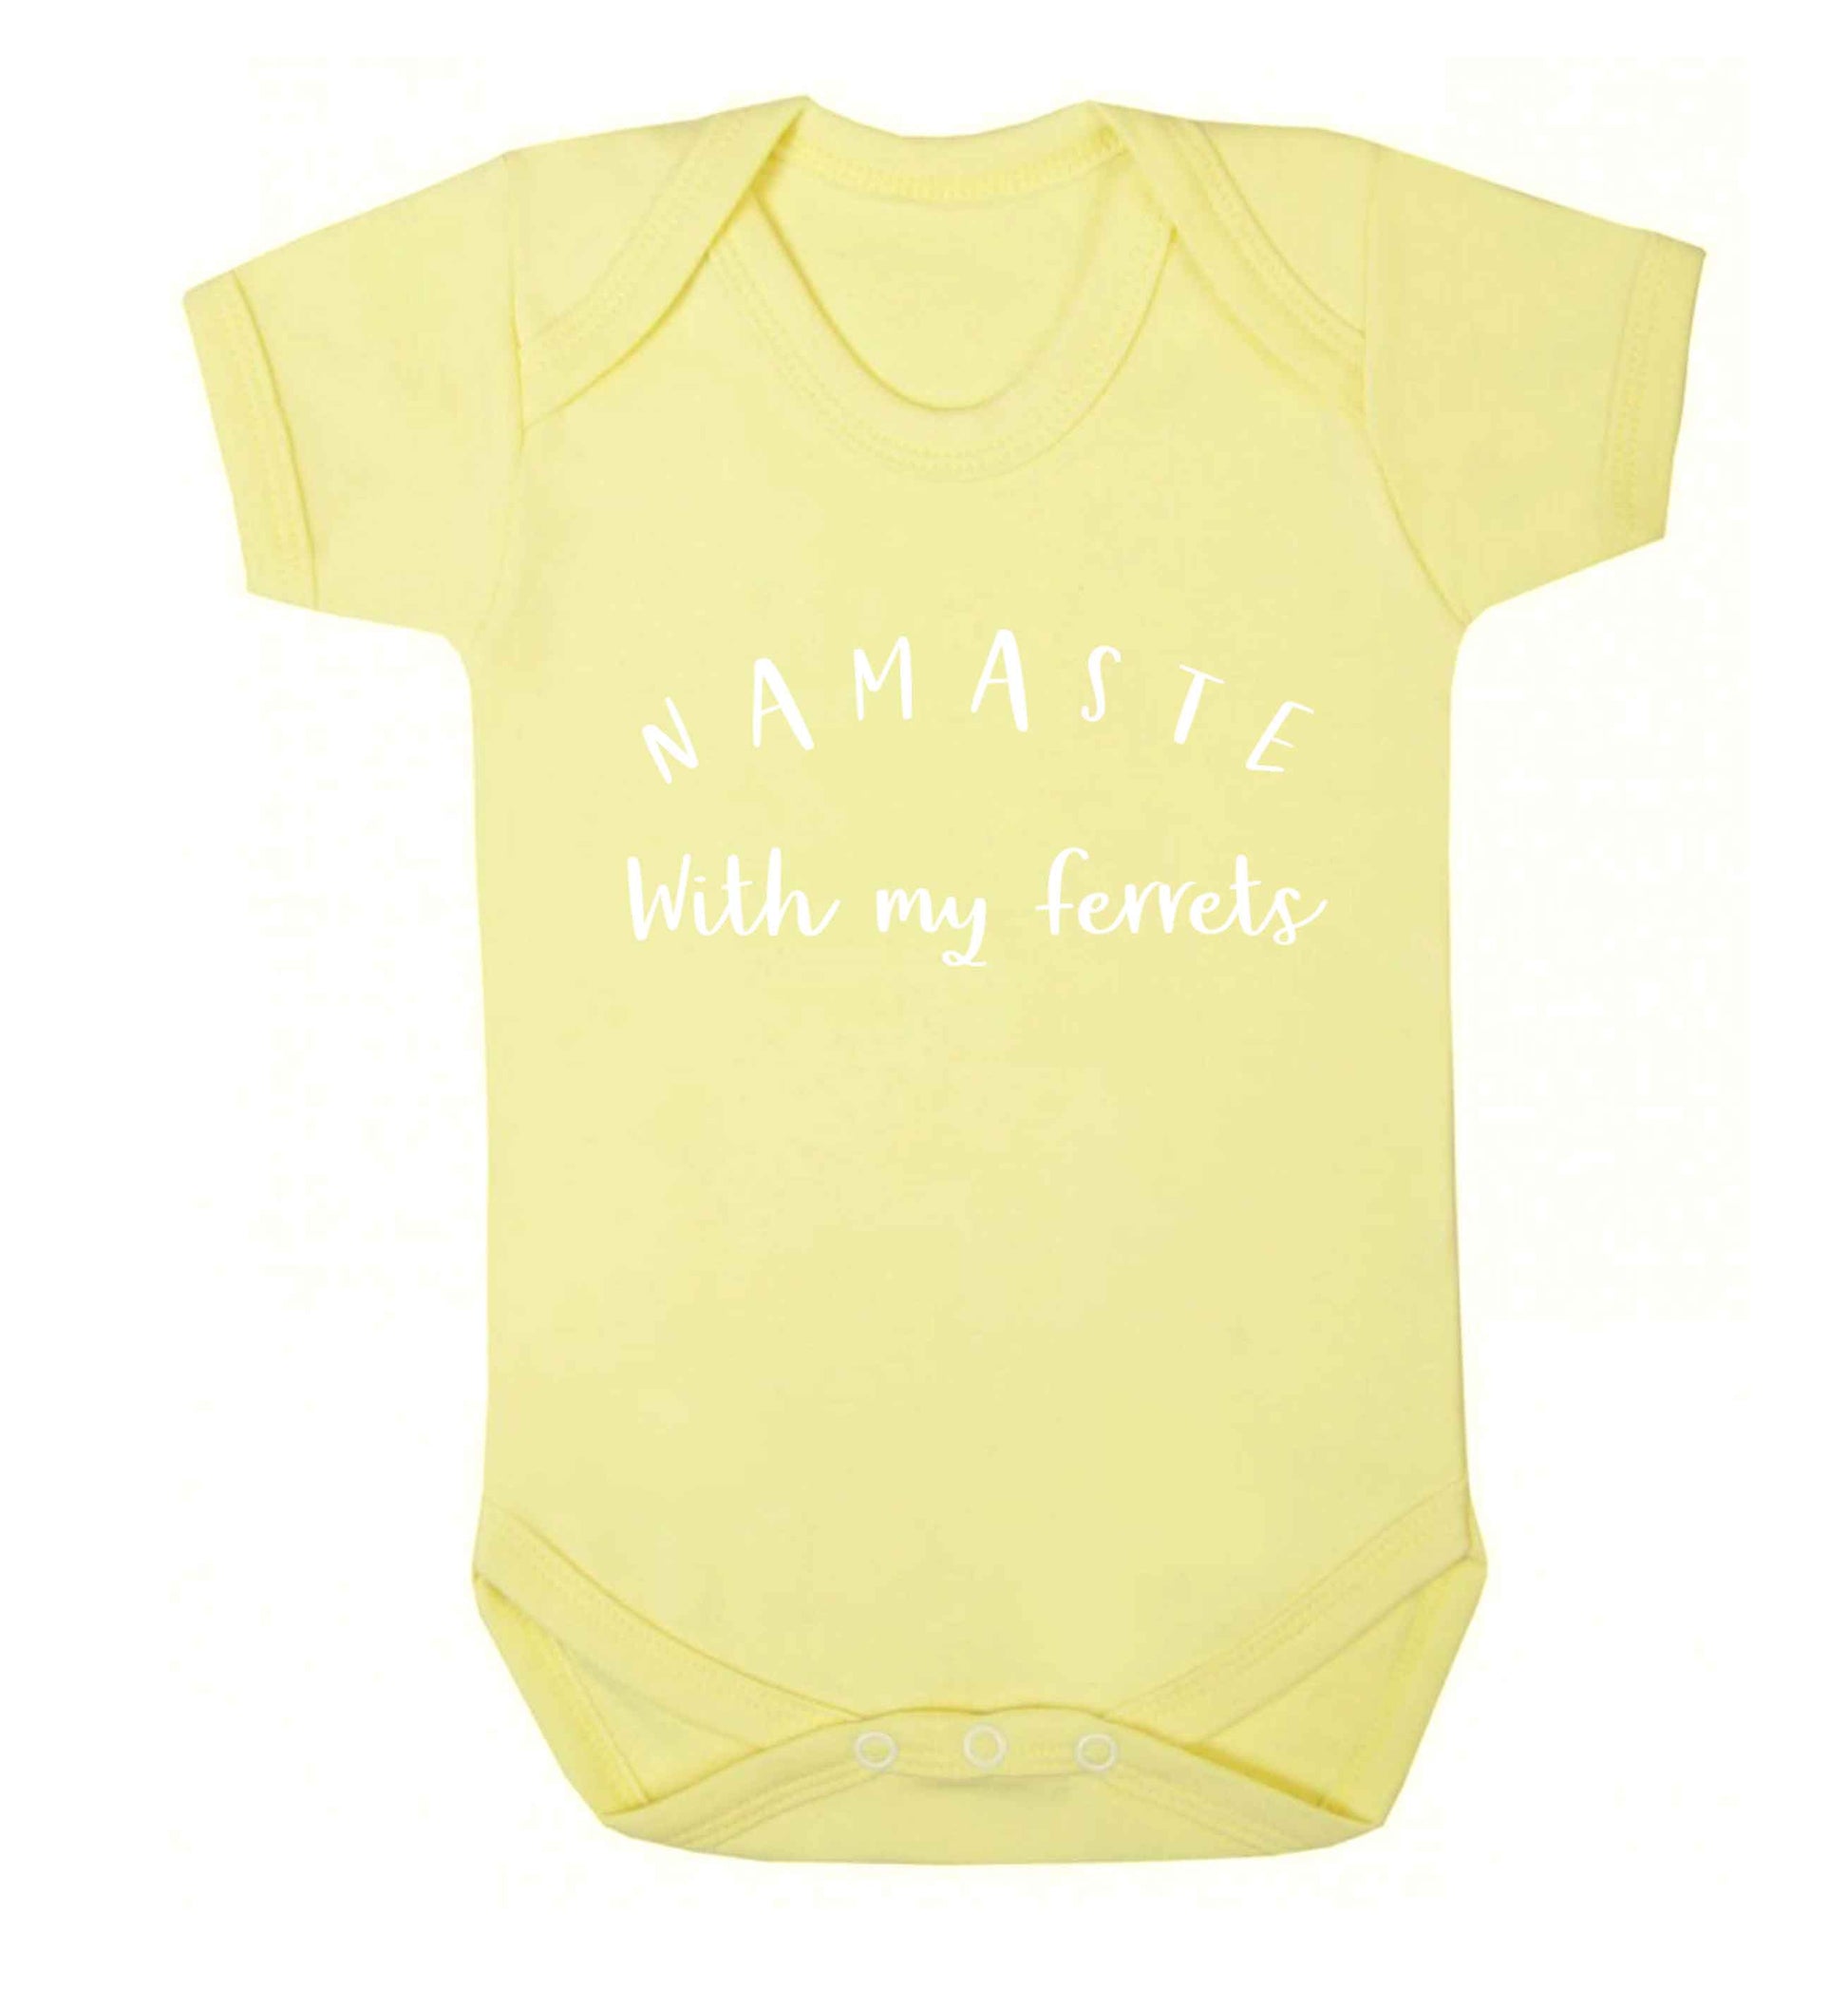 Namaste with my ferrets Baby Vest pale yellow 18-24 months